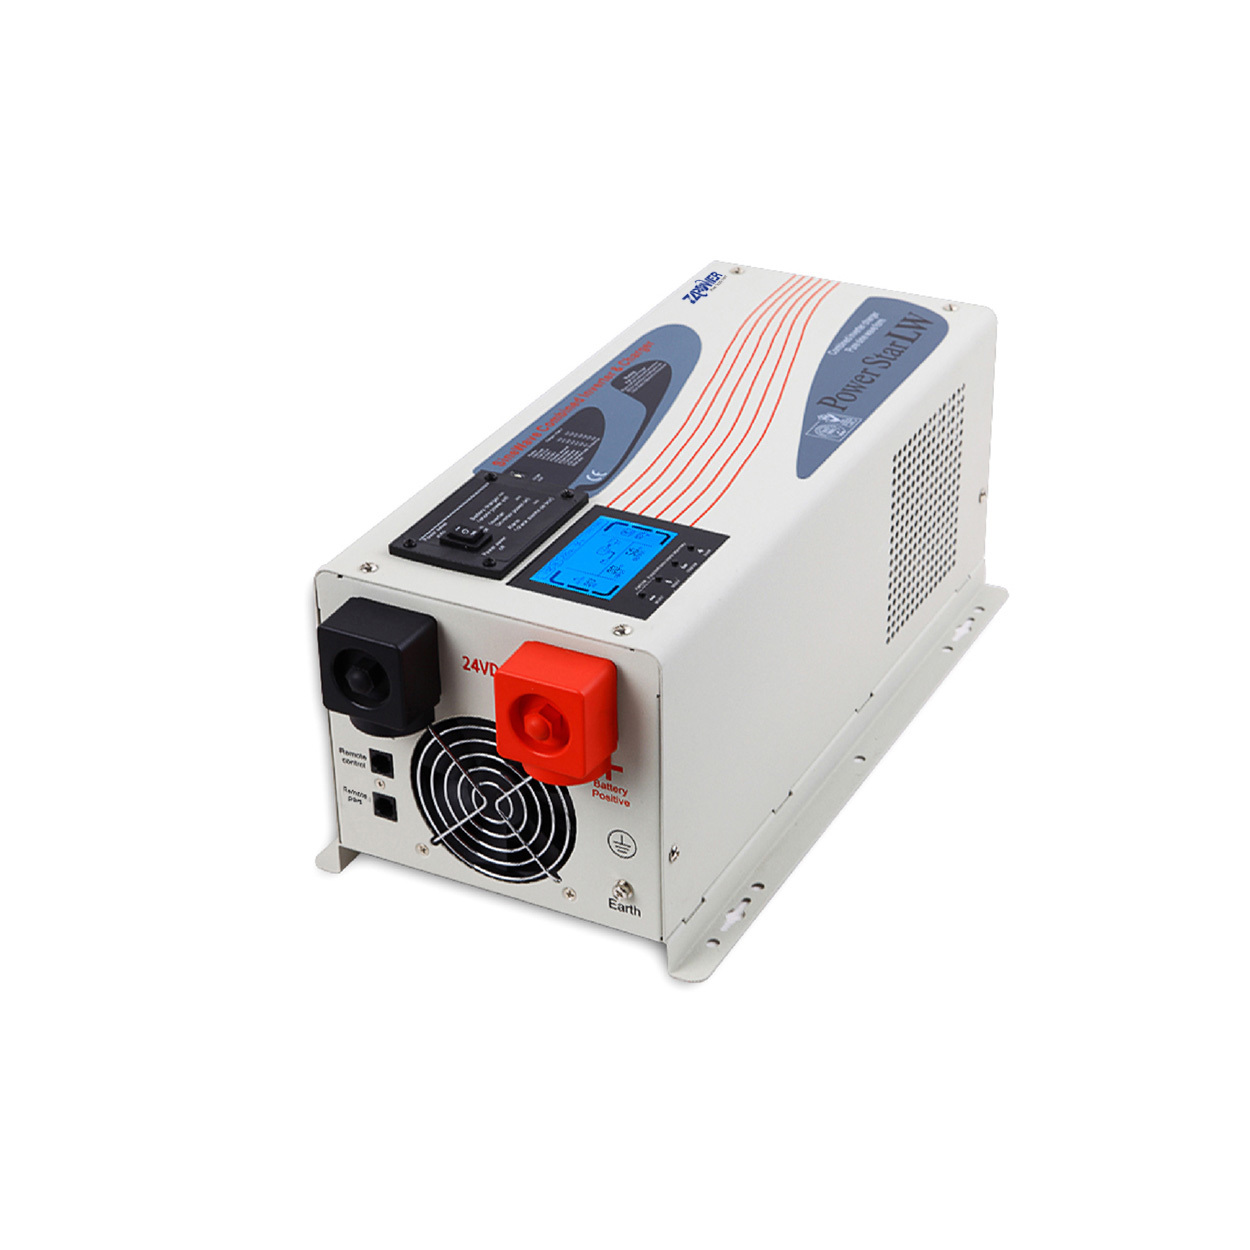 What are the precautions when using the quality Inverter for camping caravan car